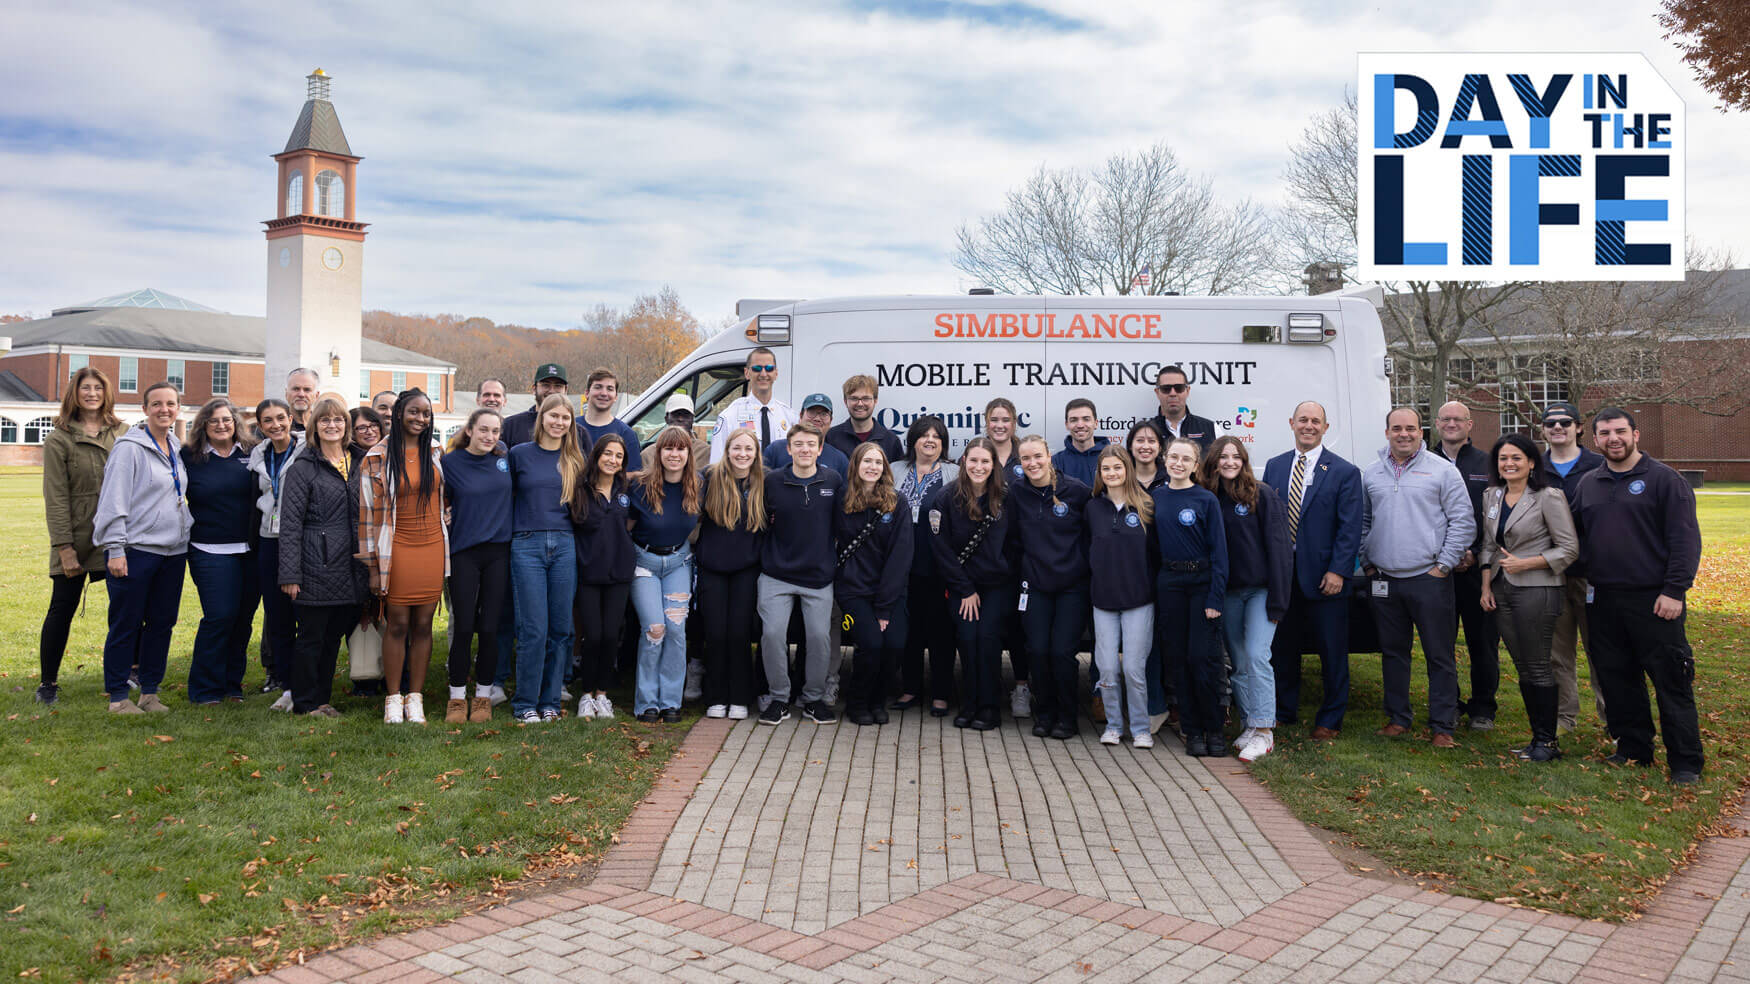 Entry level master's physician assistant students pose with an ambulance simulator.